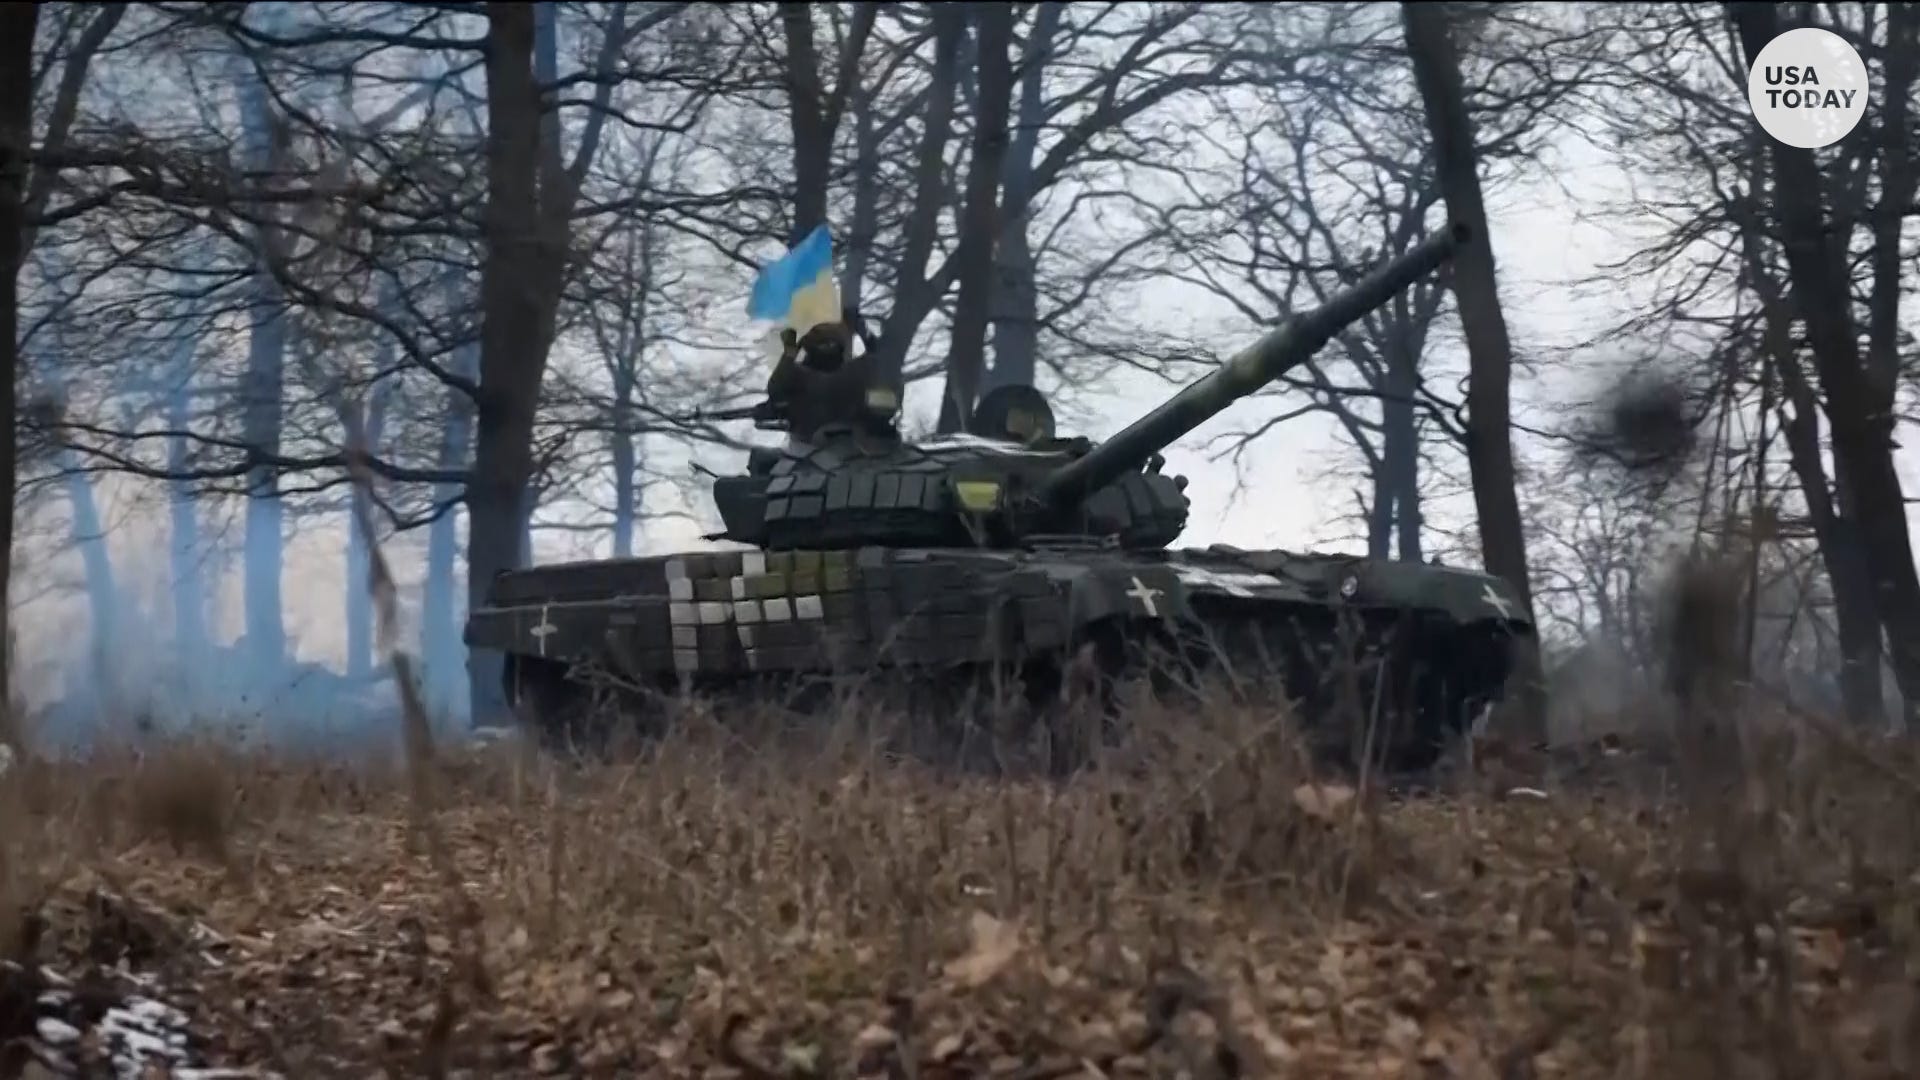 'United and determined as ever': Biden pledges 31 tanks to help Ukraine fight Russia